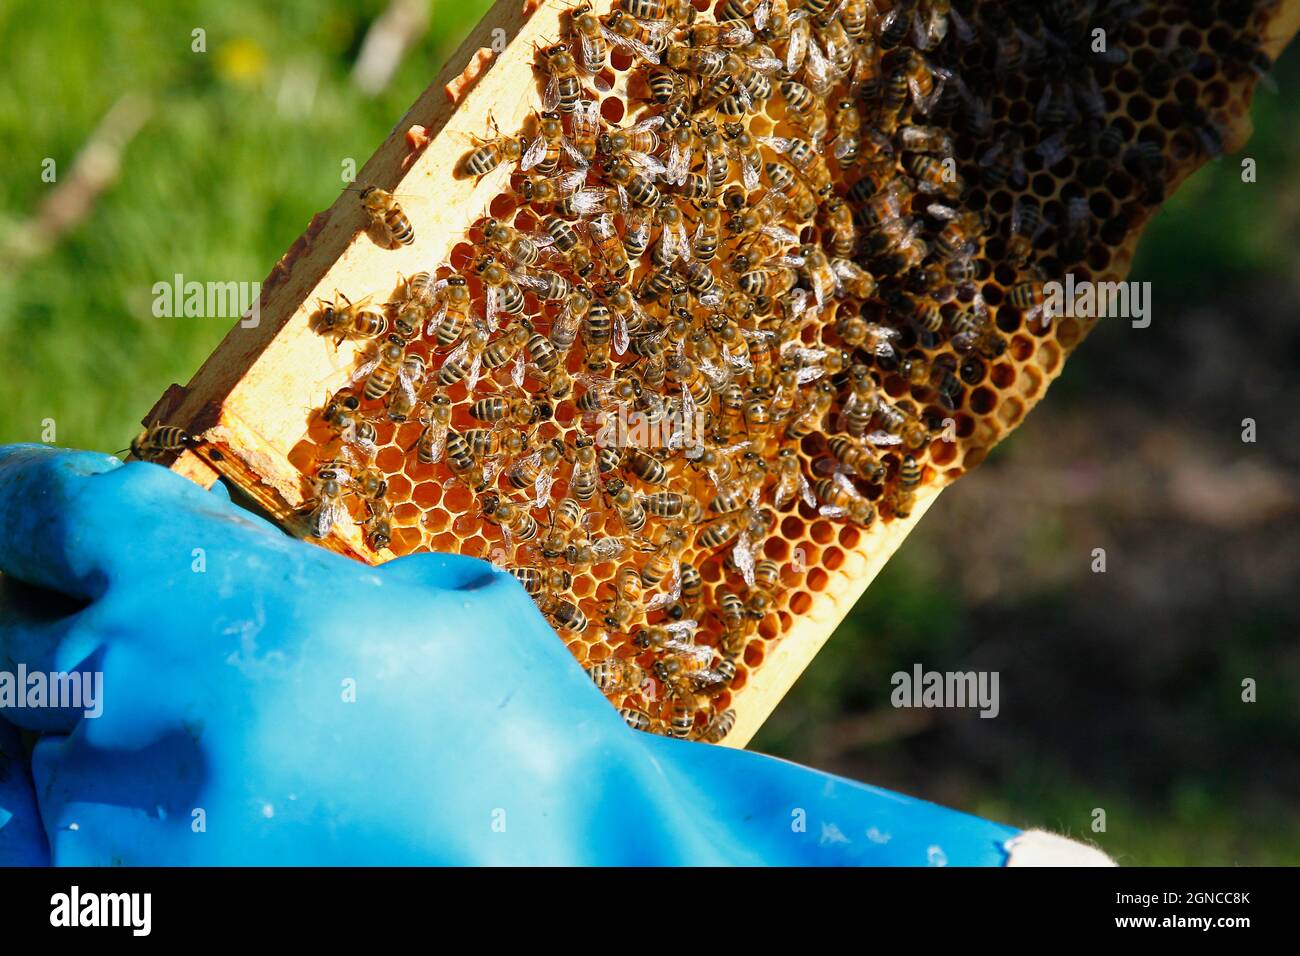 England, Kent, Yalding Organic Gardens, Food, Fresh honey being harvested from bee hive. Stock Photo